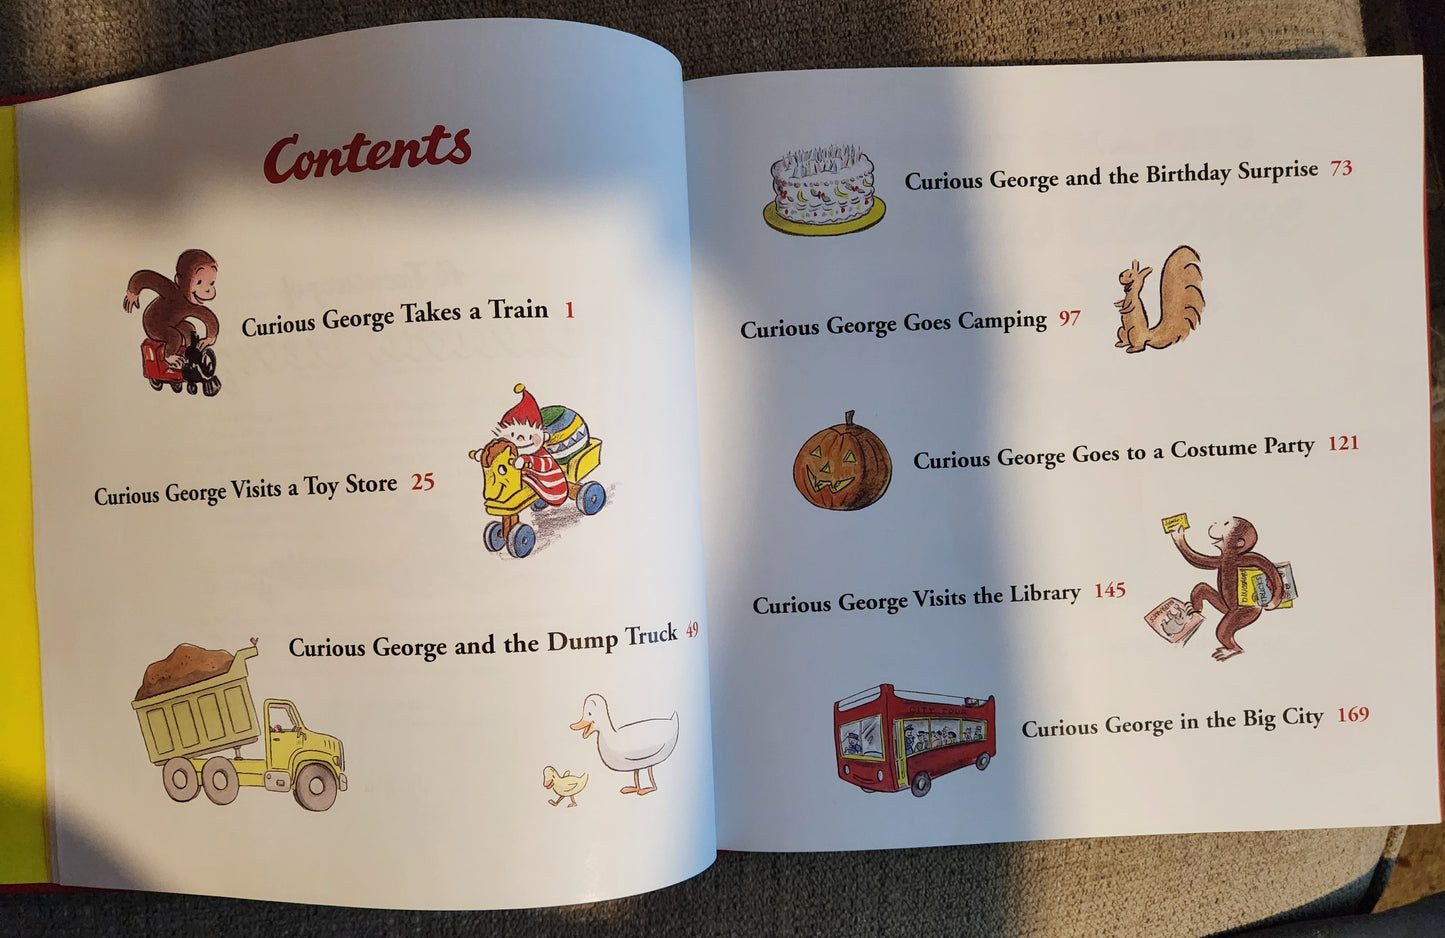 "A Treasury of Curious George" by Margret and H. A. Rey - Dead Tree Dreams Bookstore